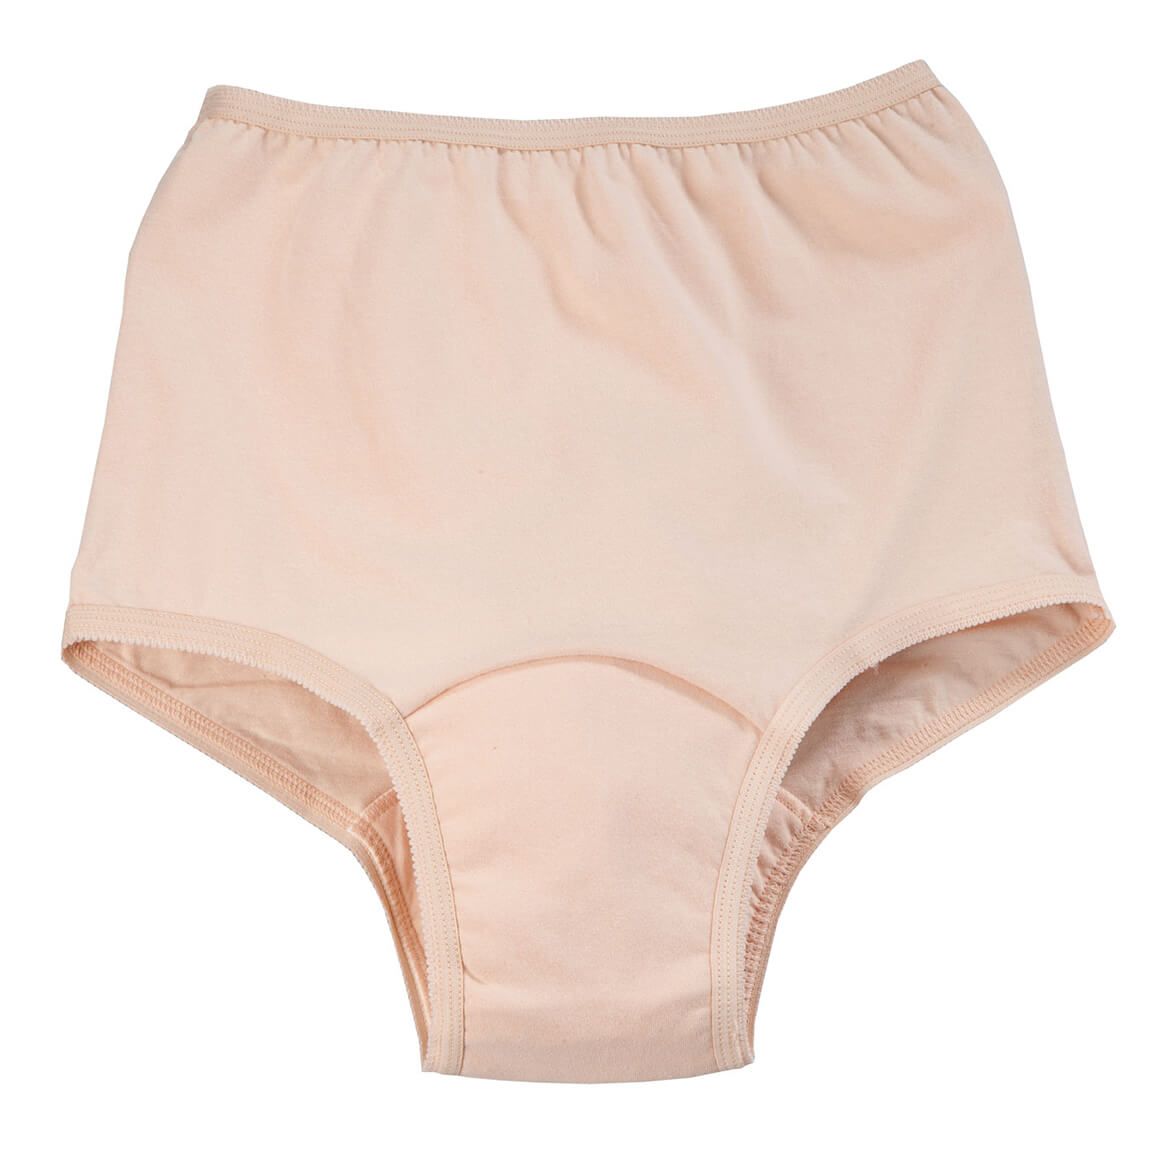 Incontinence Panties For Women - 20 Oz. Beige + '-' + 348104